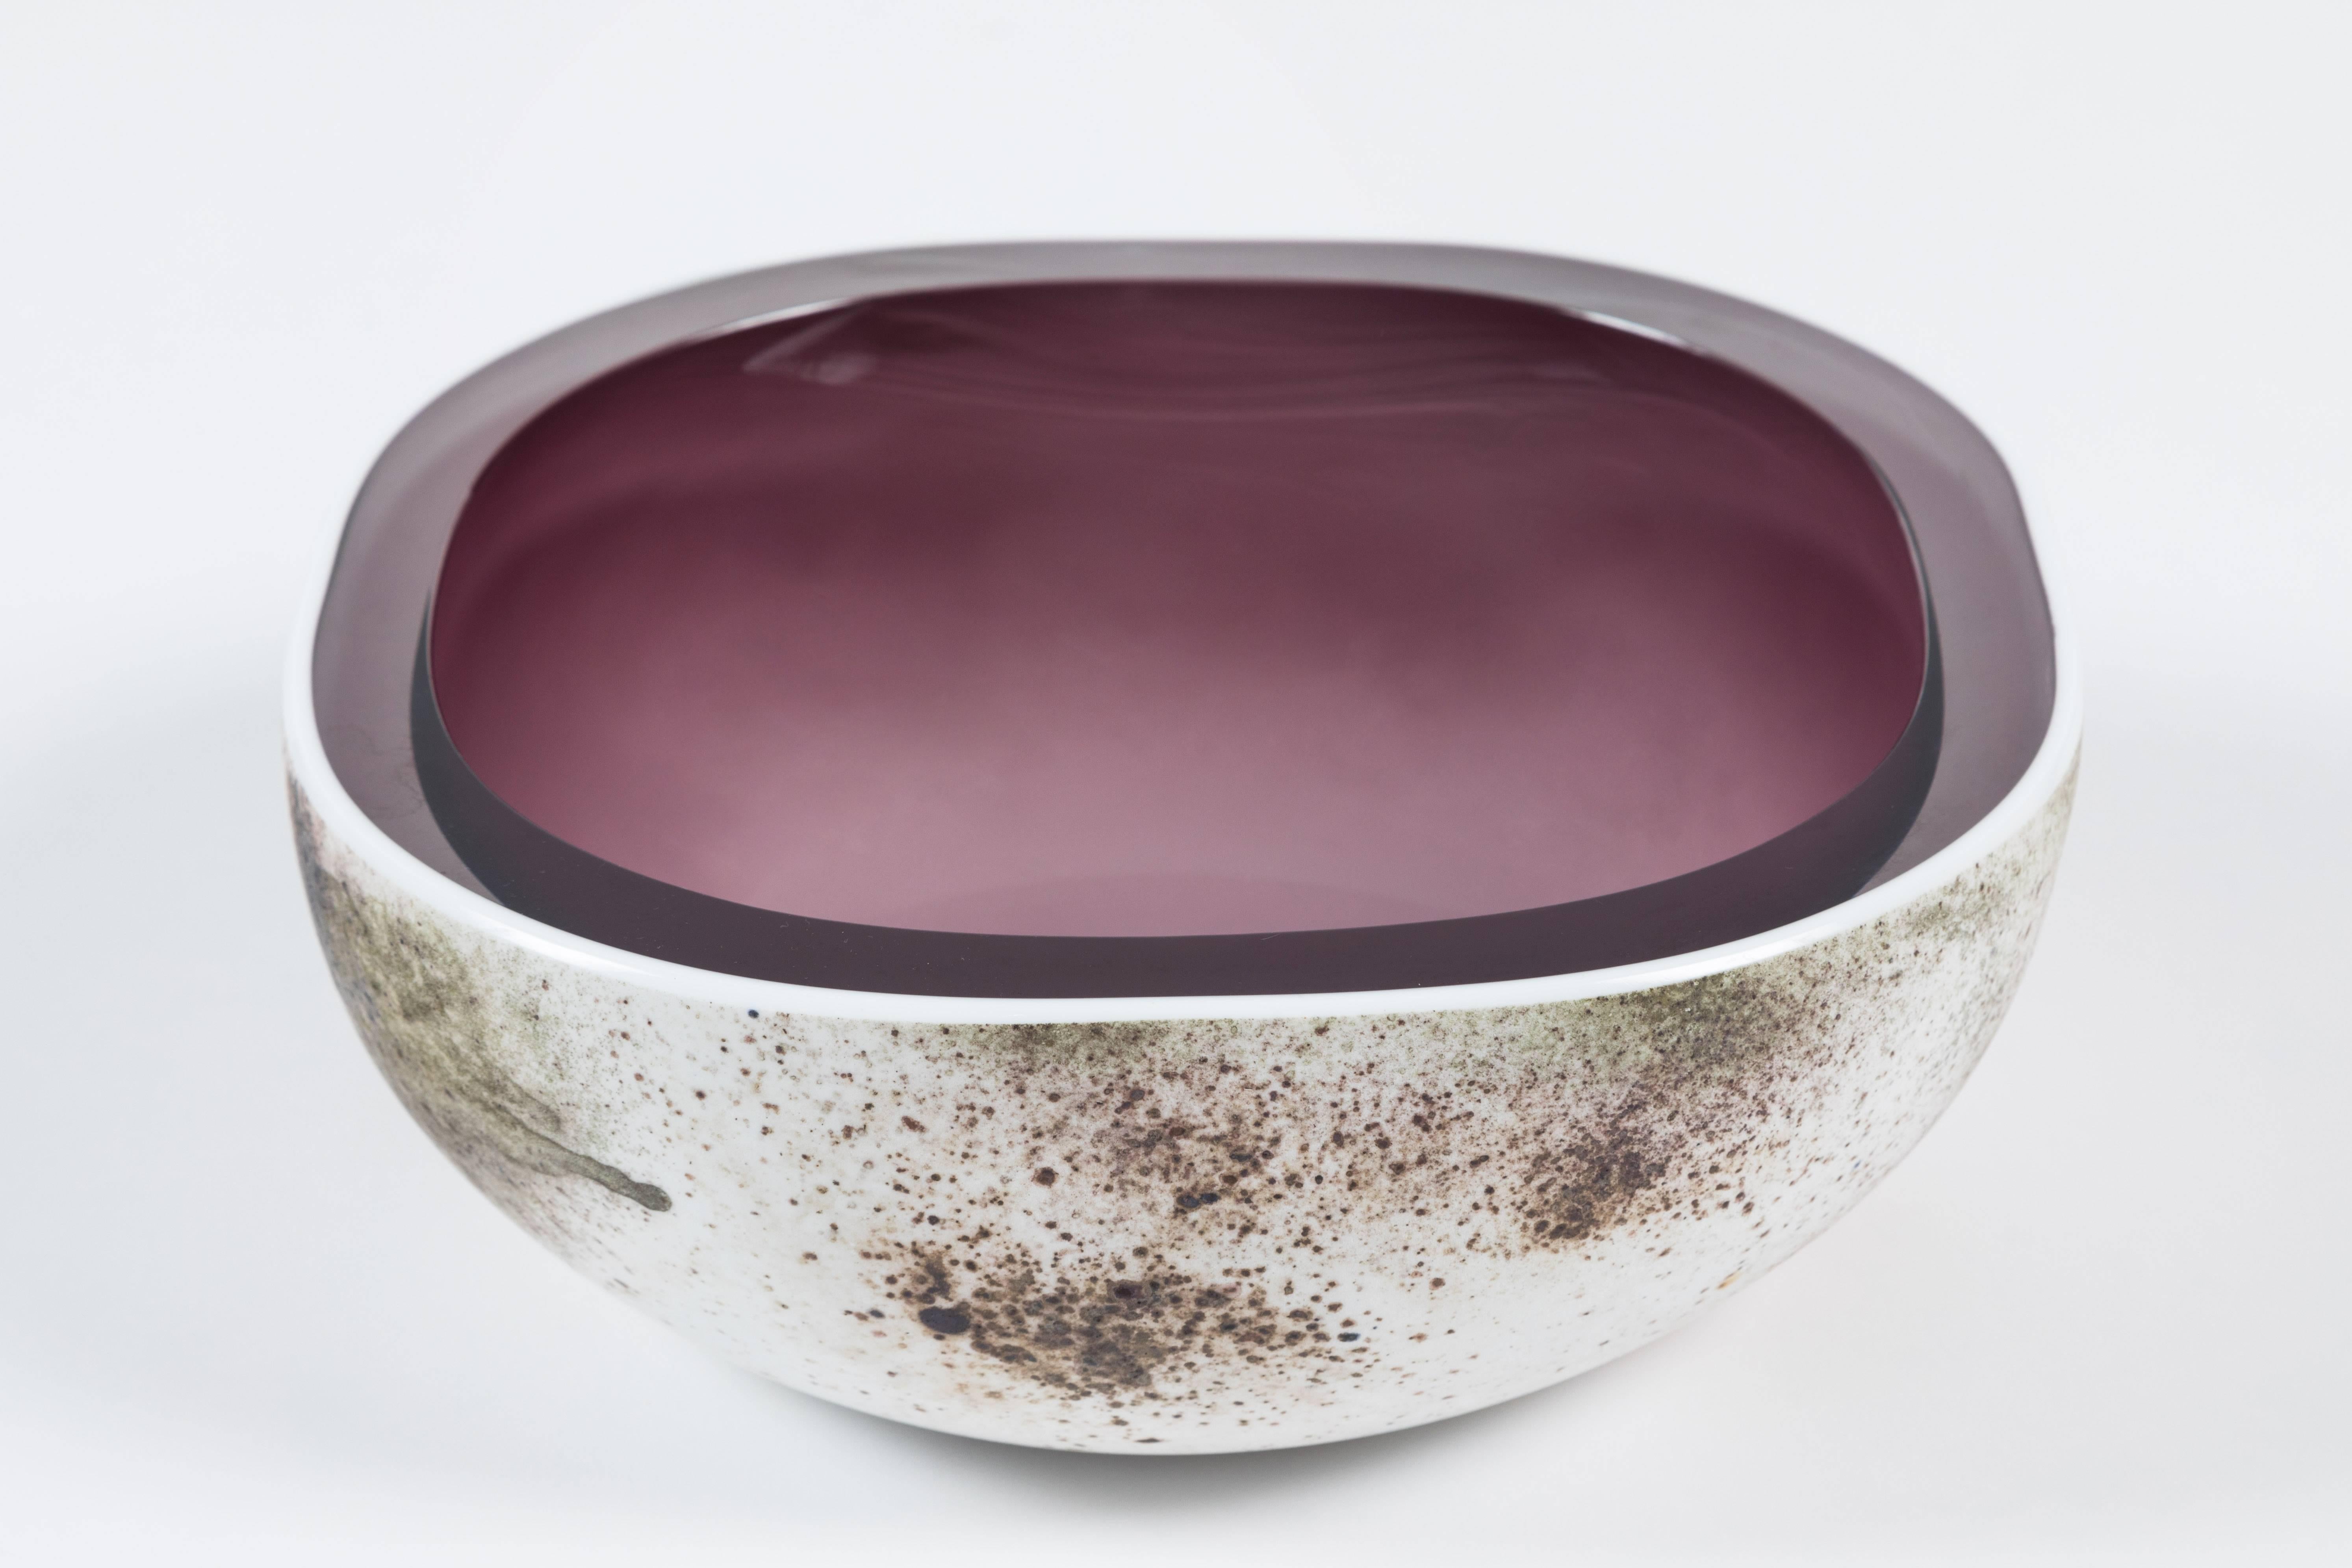 Great flat sided bowl featuring a white Coroso exterior and a vibrant purple interior. A very stylish artwork in Murano glass.